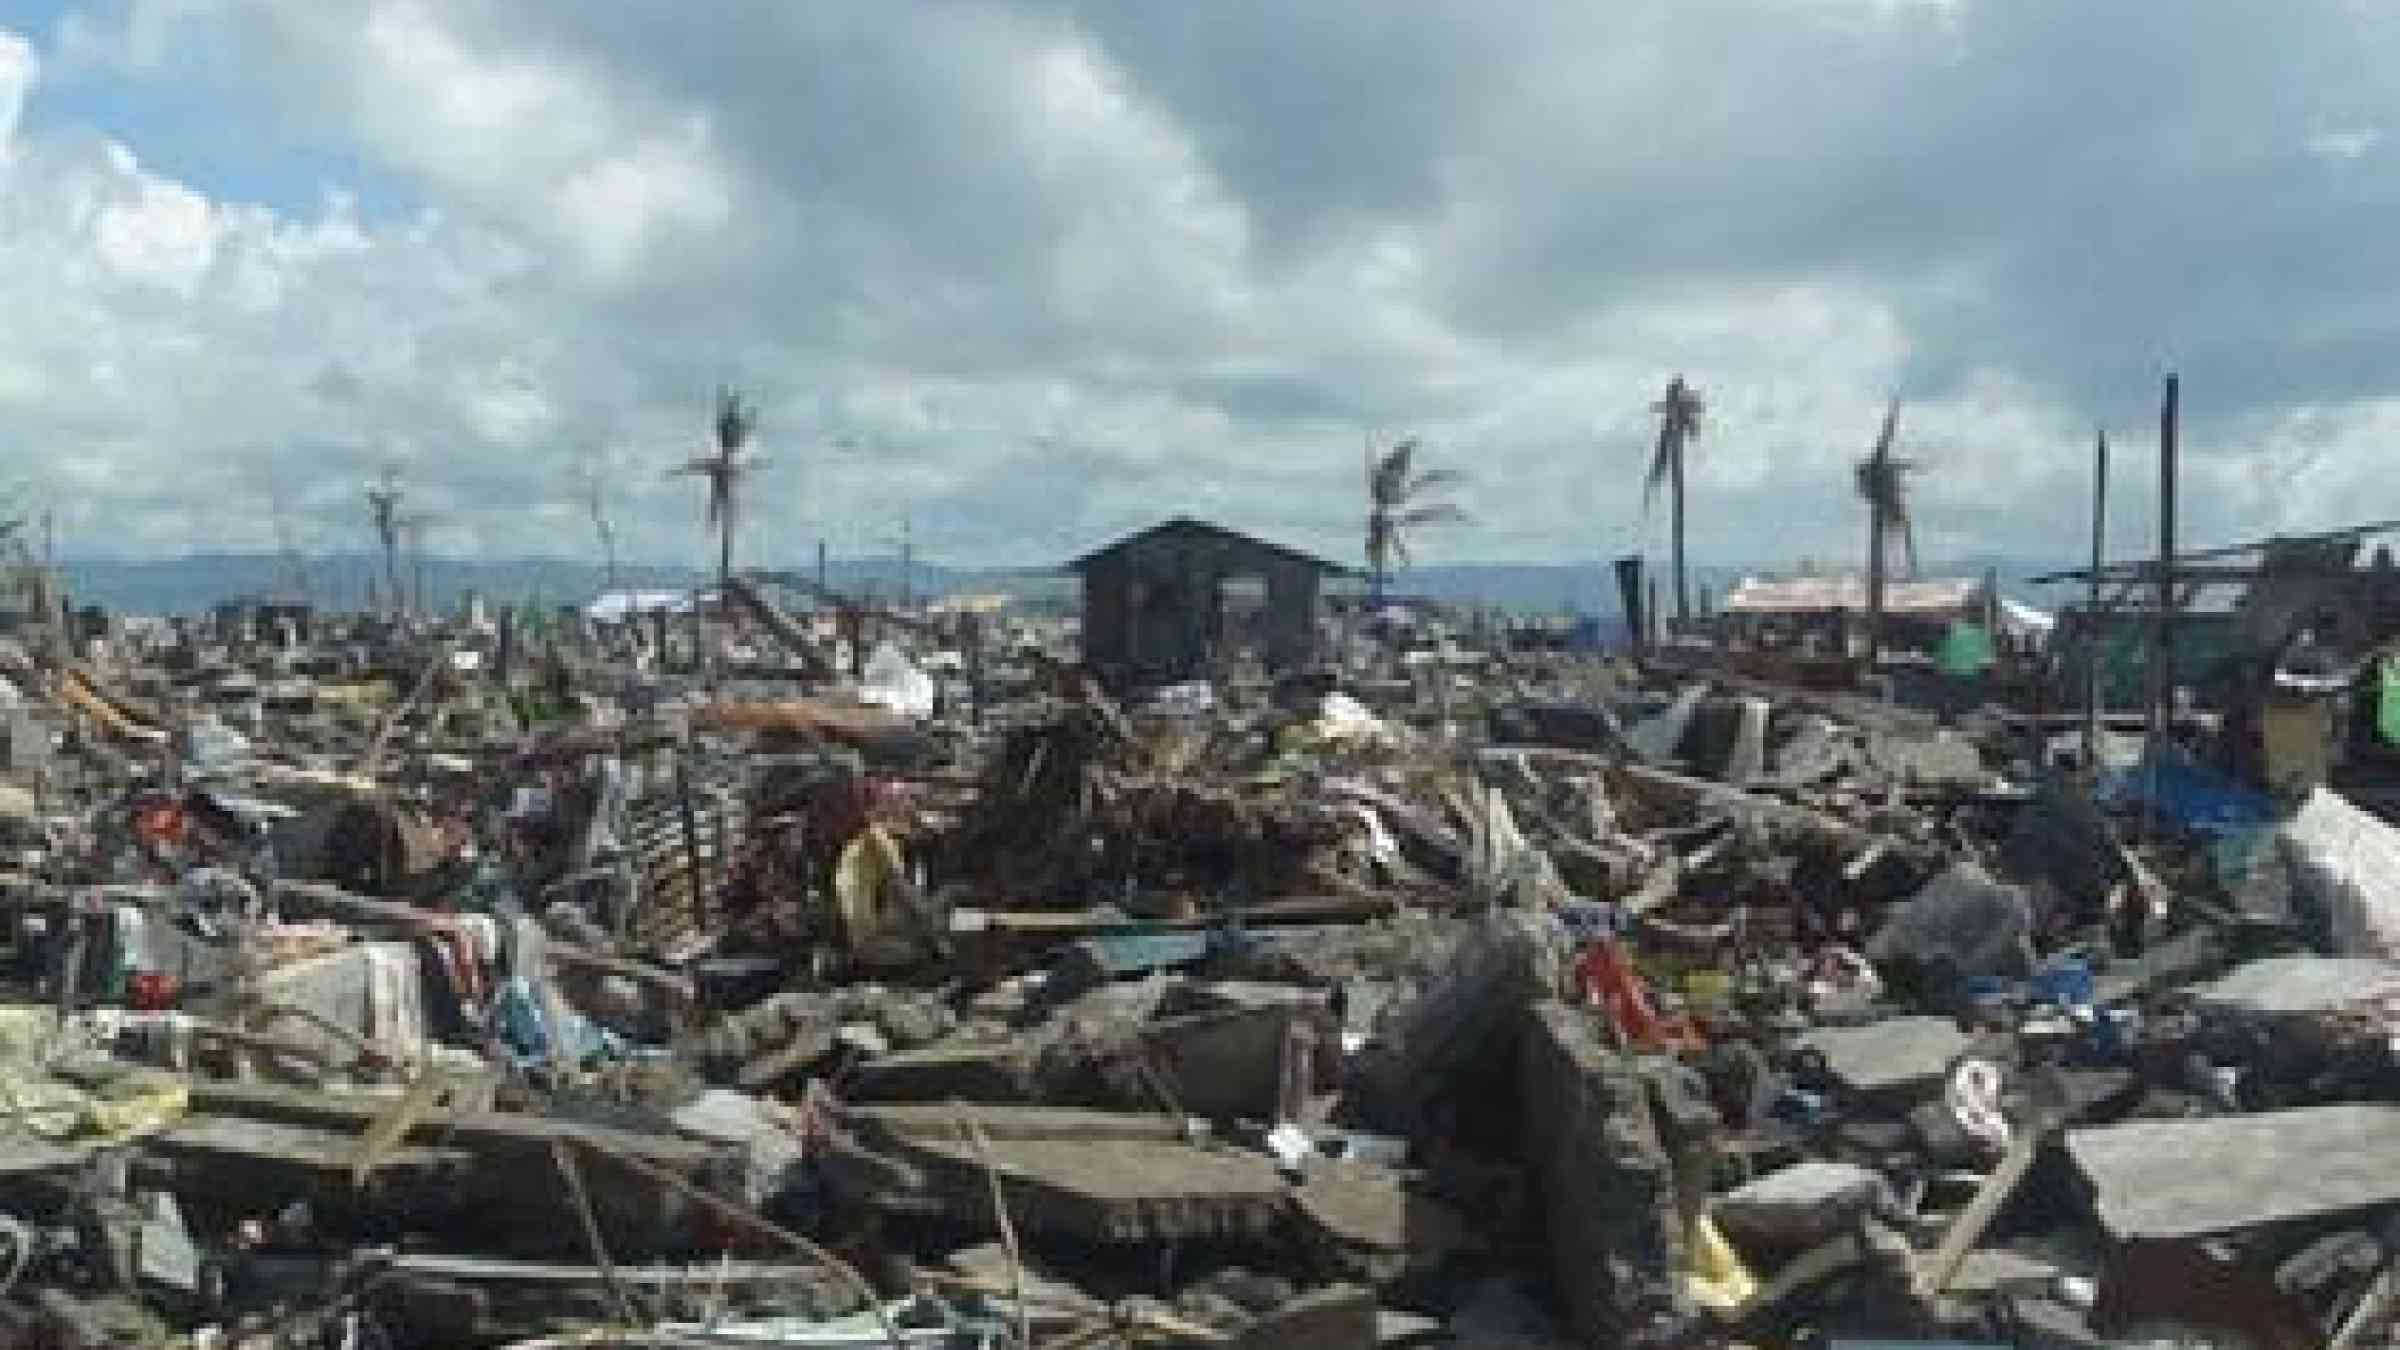 A community in the city of Tacloban, Philippines, was flattened by Typhoon Haiyan last year. (Photo: Kristoffer Berse)